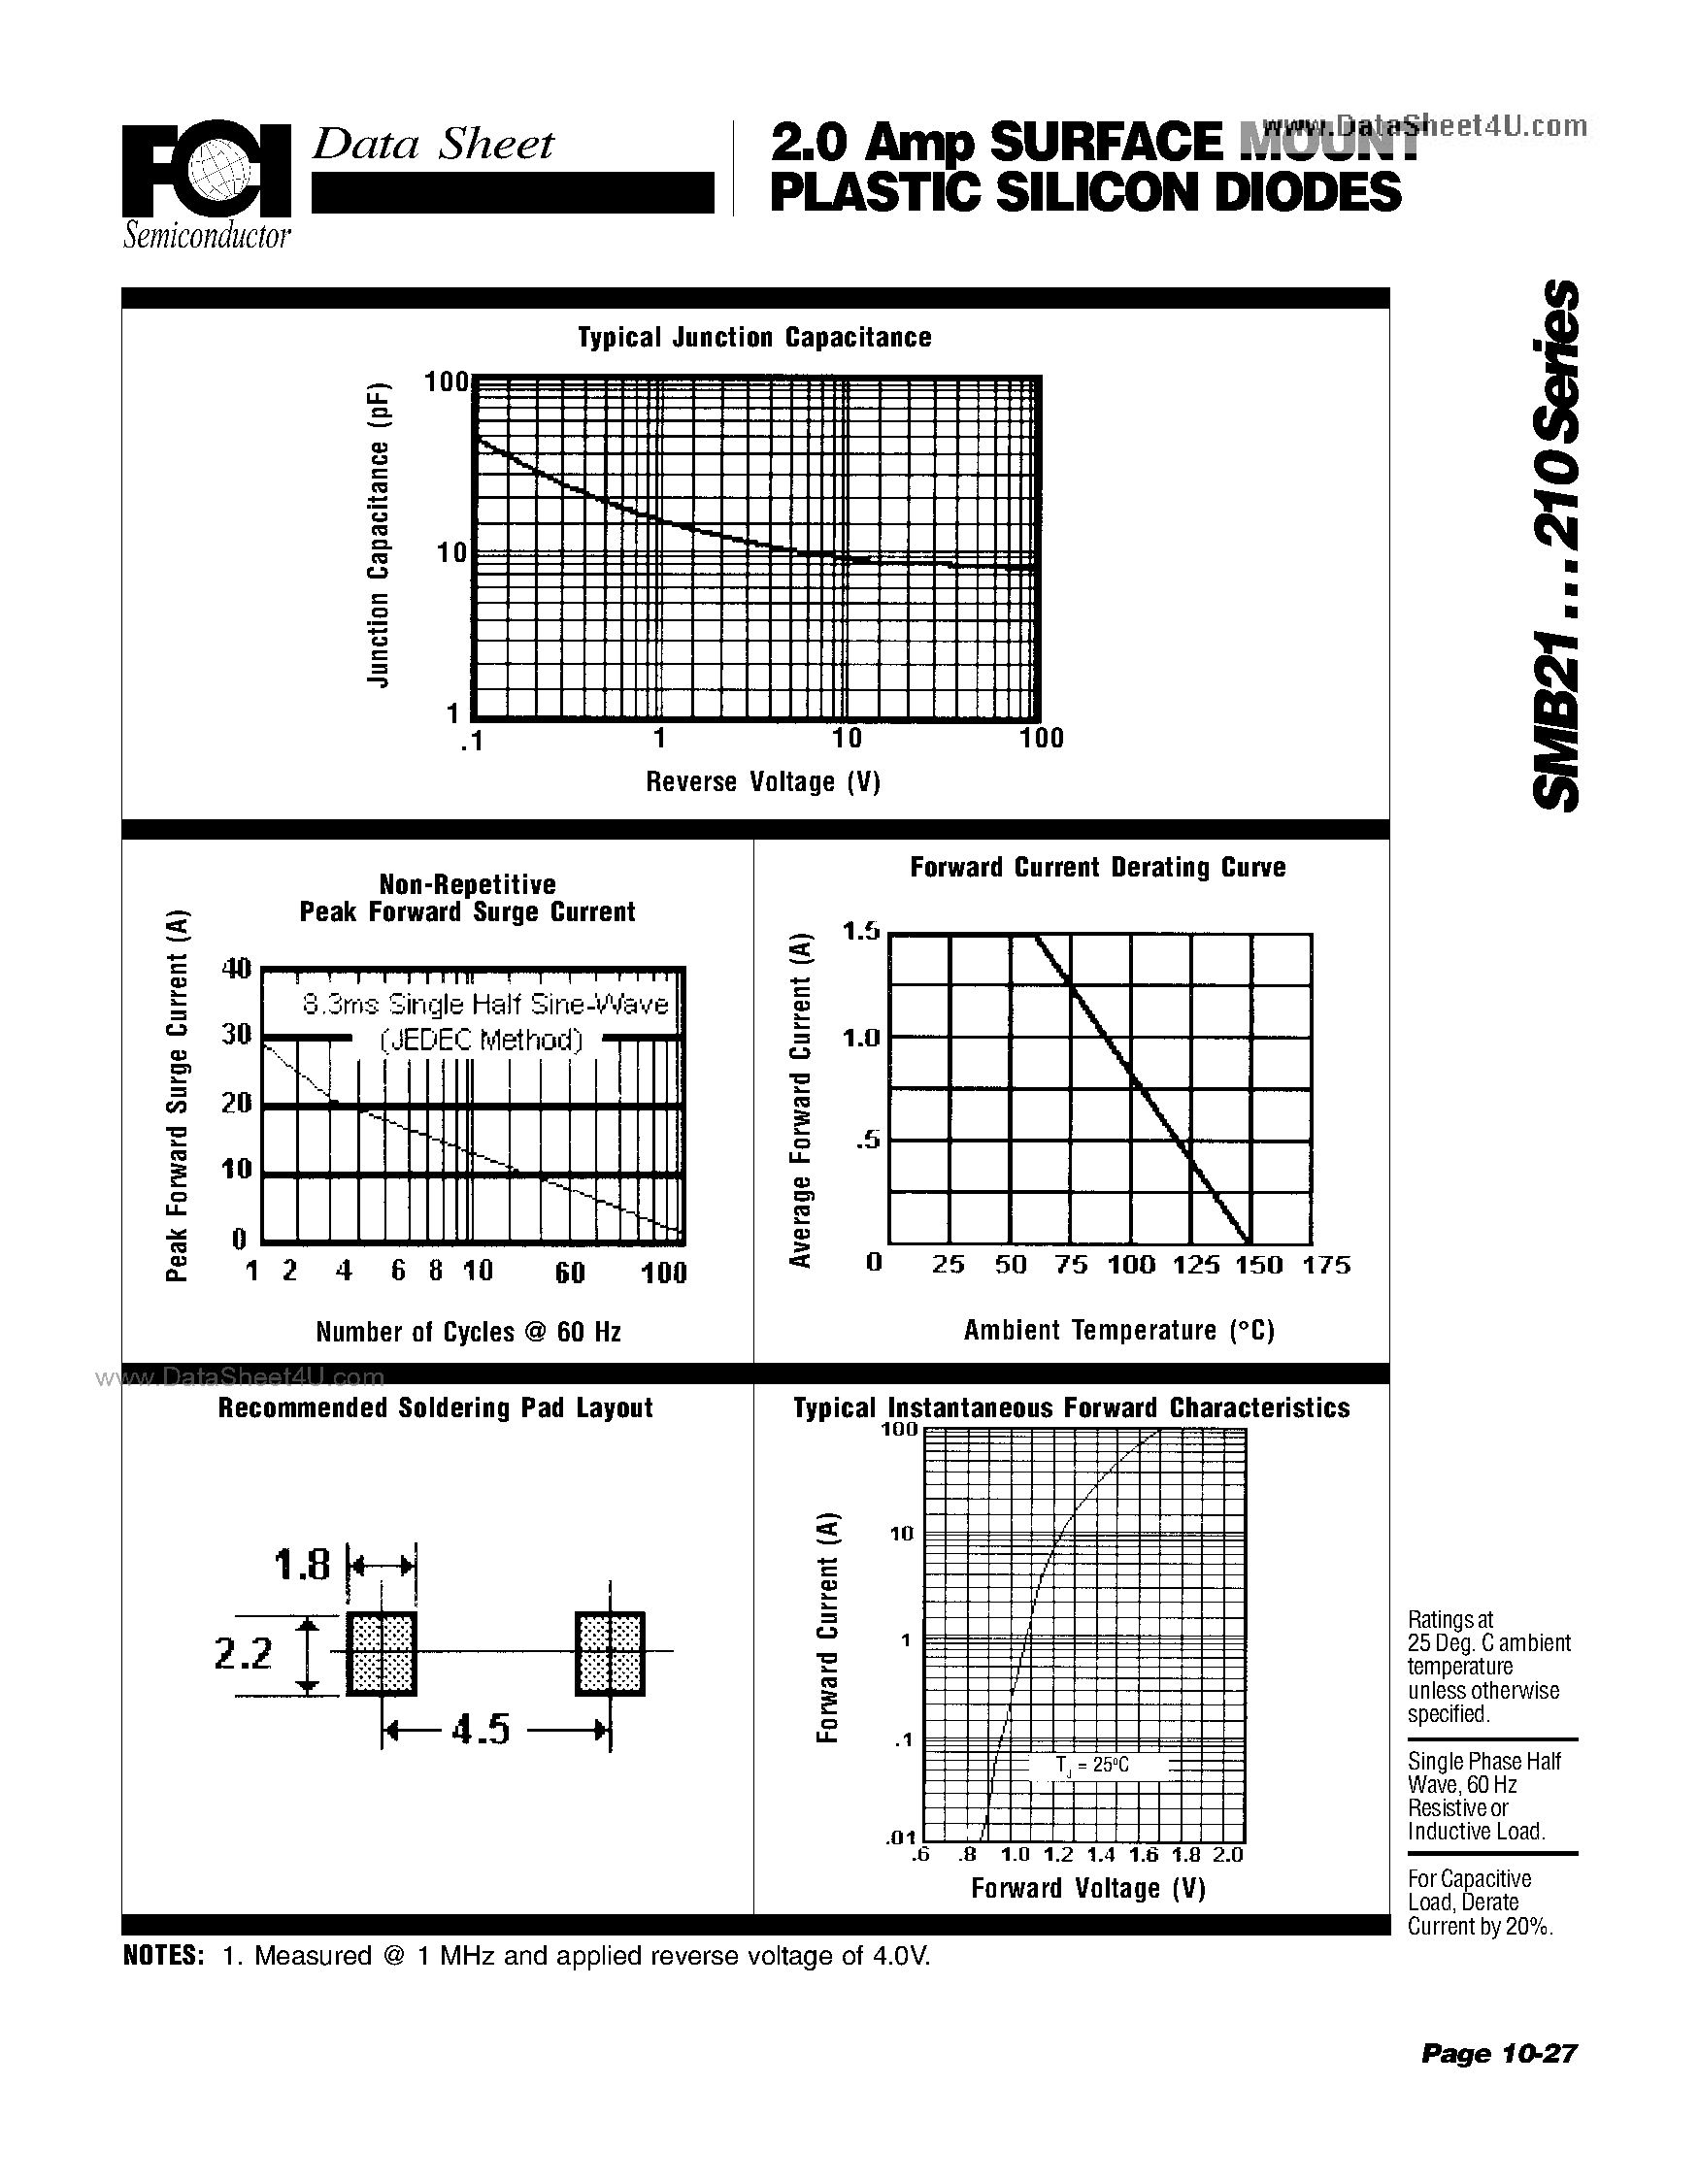 Datasheet SMB21 - (SMB21 - SMB210) 2.0 Amp SURFACE MOUNT PLASTIC SILICON DIODES Mechanical Dimensions page 2